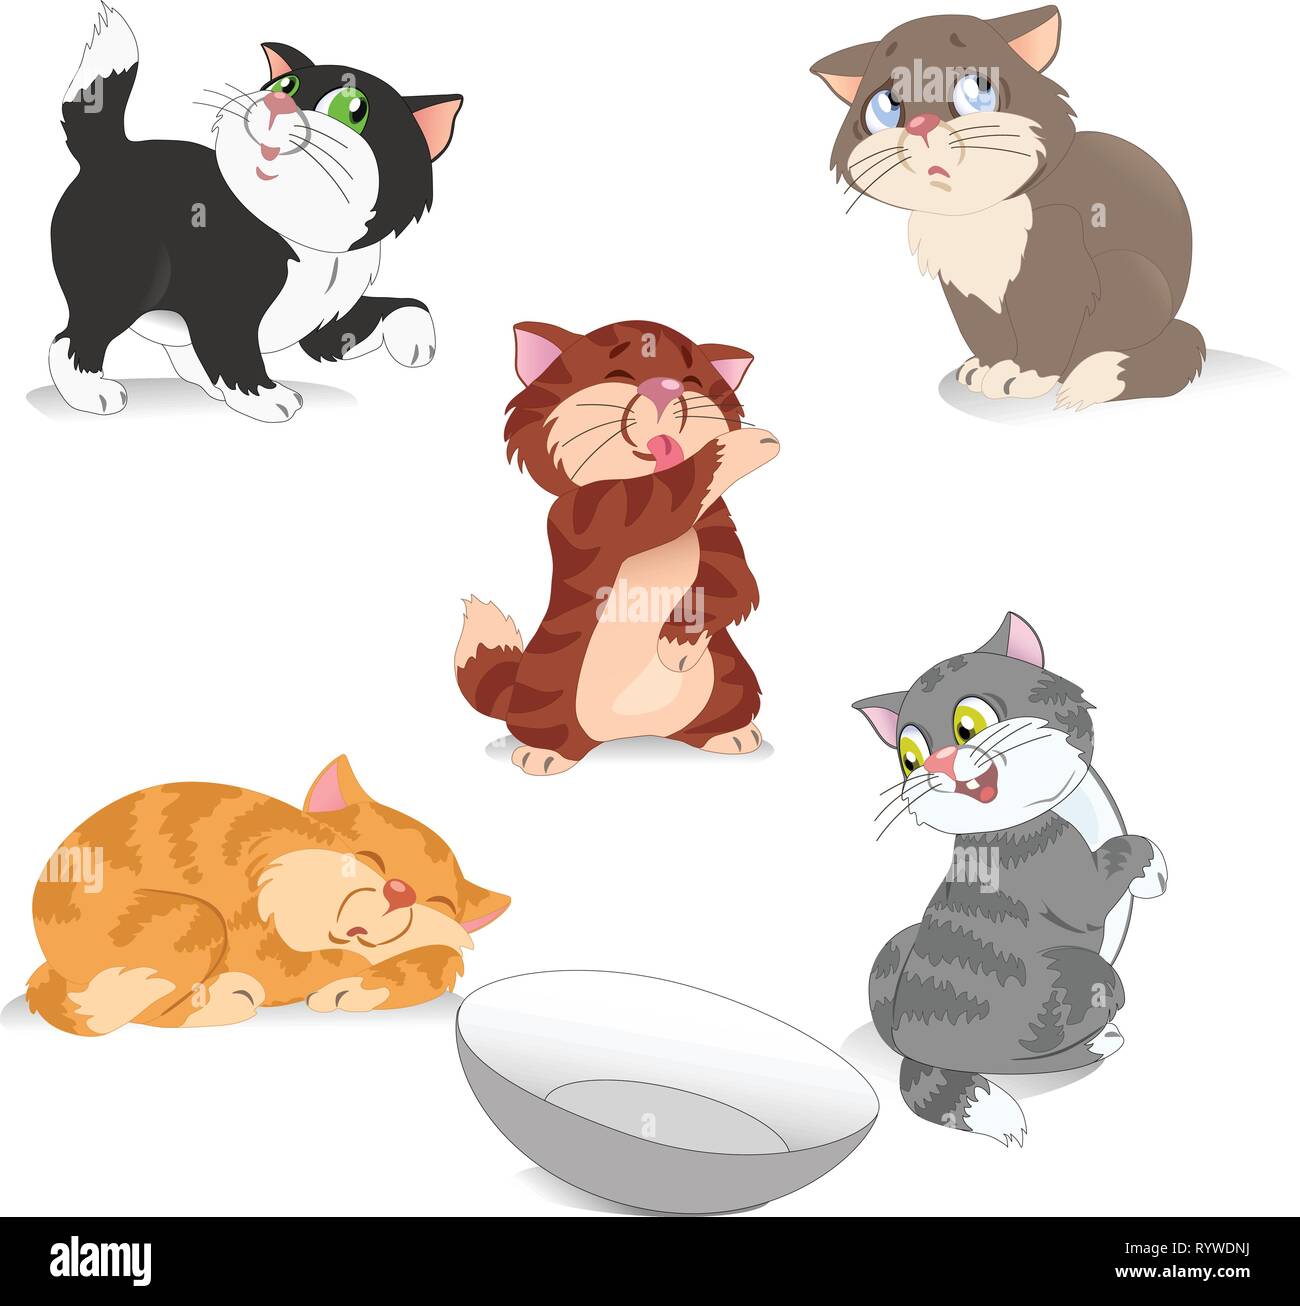 On vector illustration set of funny cartoon kittens in different poses isolated on white background Stock Vector